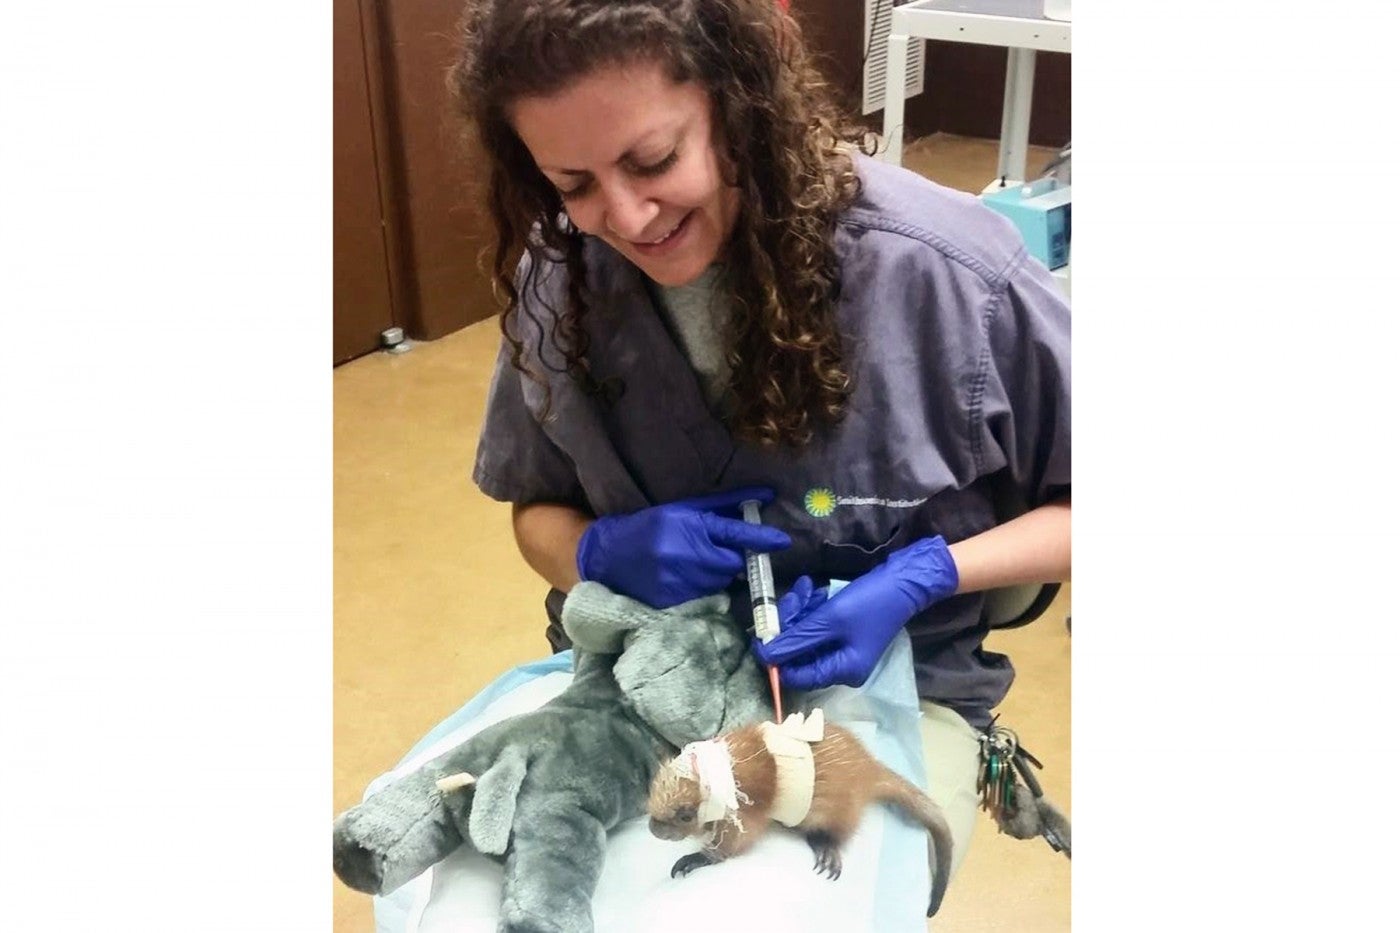 Jessica Sosa performs a blood draw on a prehensile-tailed porcupette at the veterinary hospital.